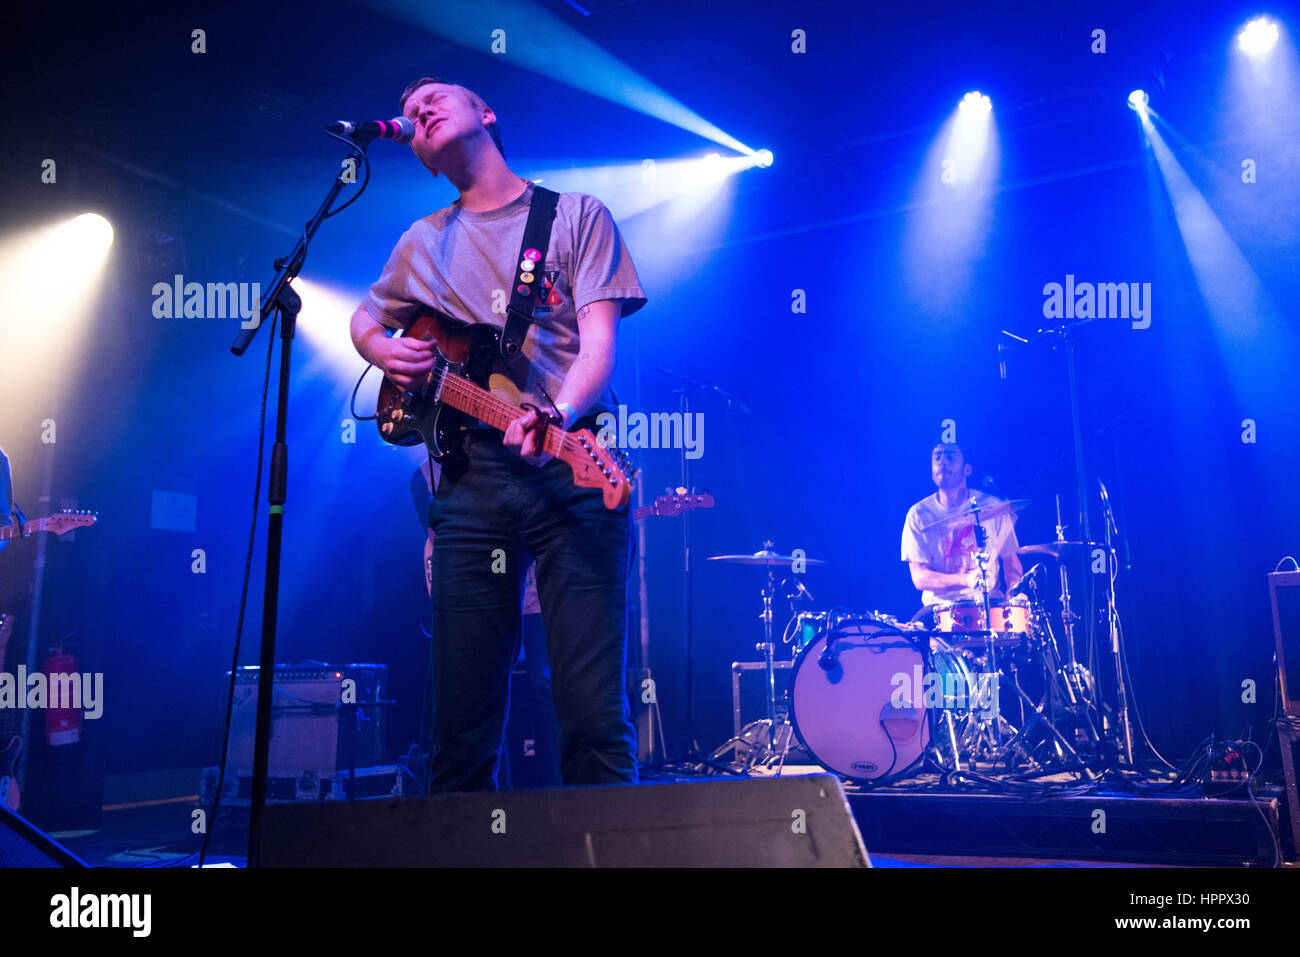 Evan Stephens Hall of Pinegrove performs at Scala, London on February 24, 2017. Stock Photo